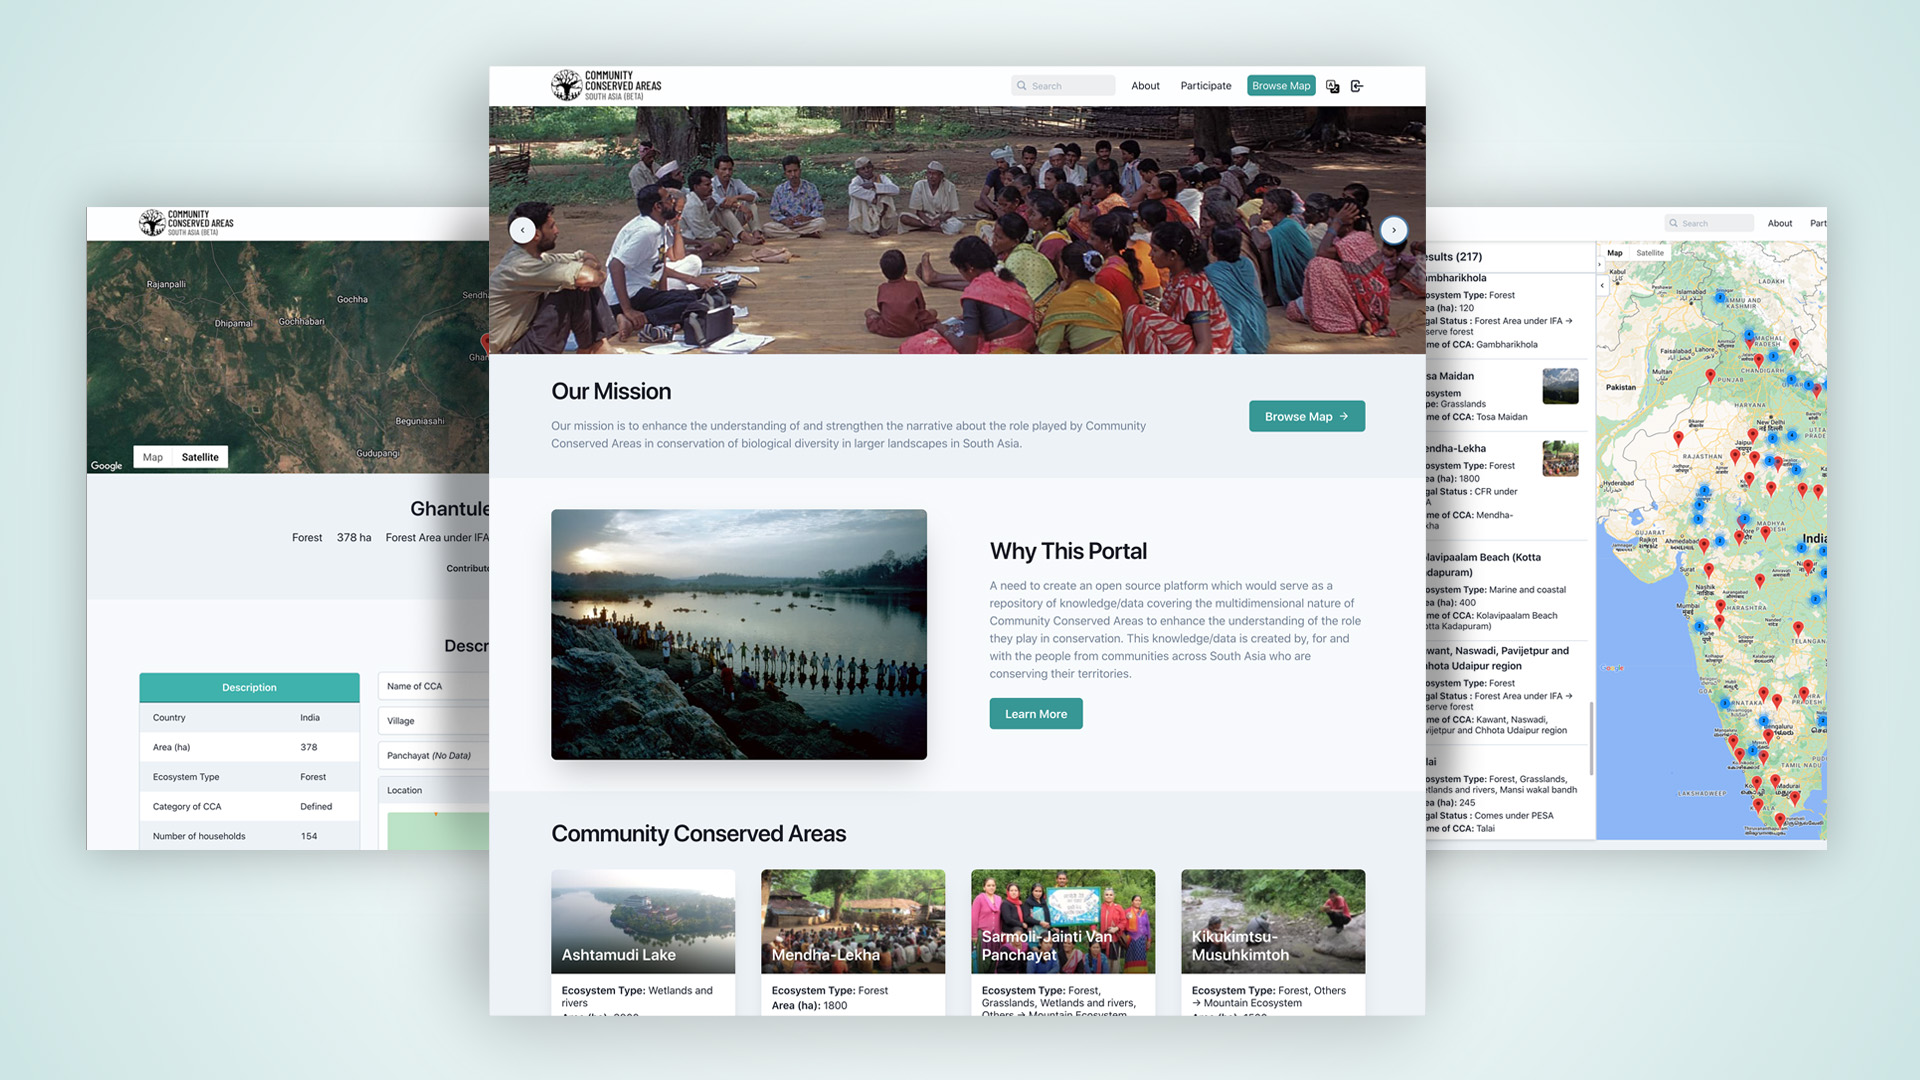 New portal presents the diversity of Community Conserved Areas in India